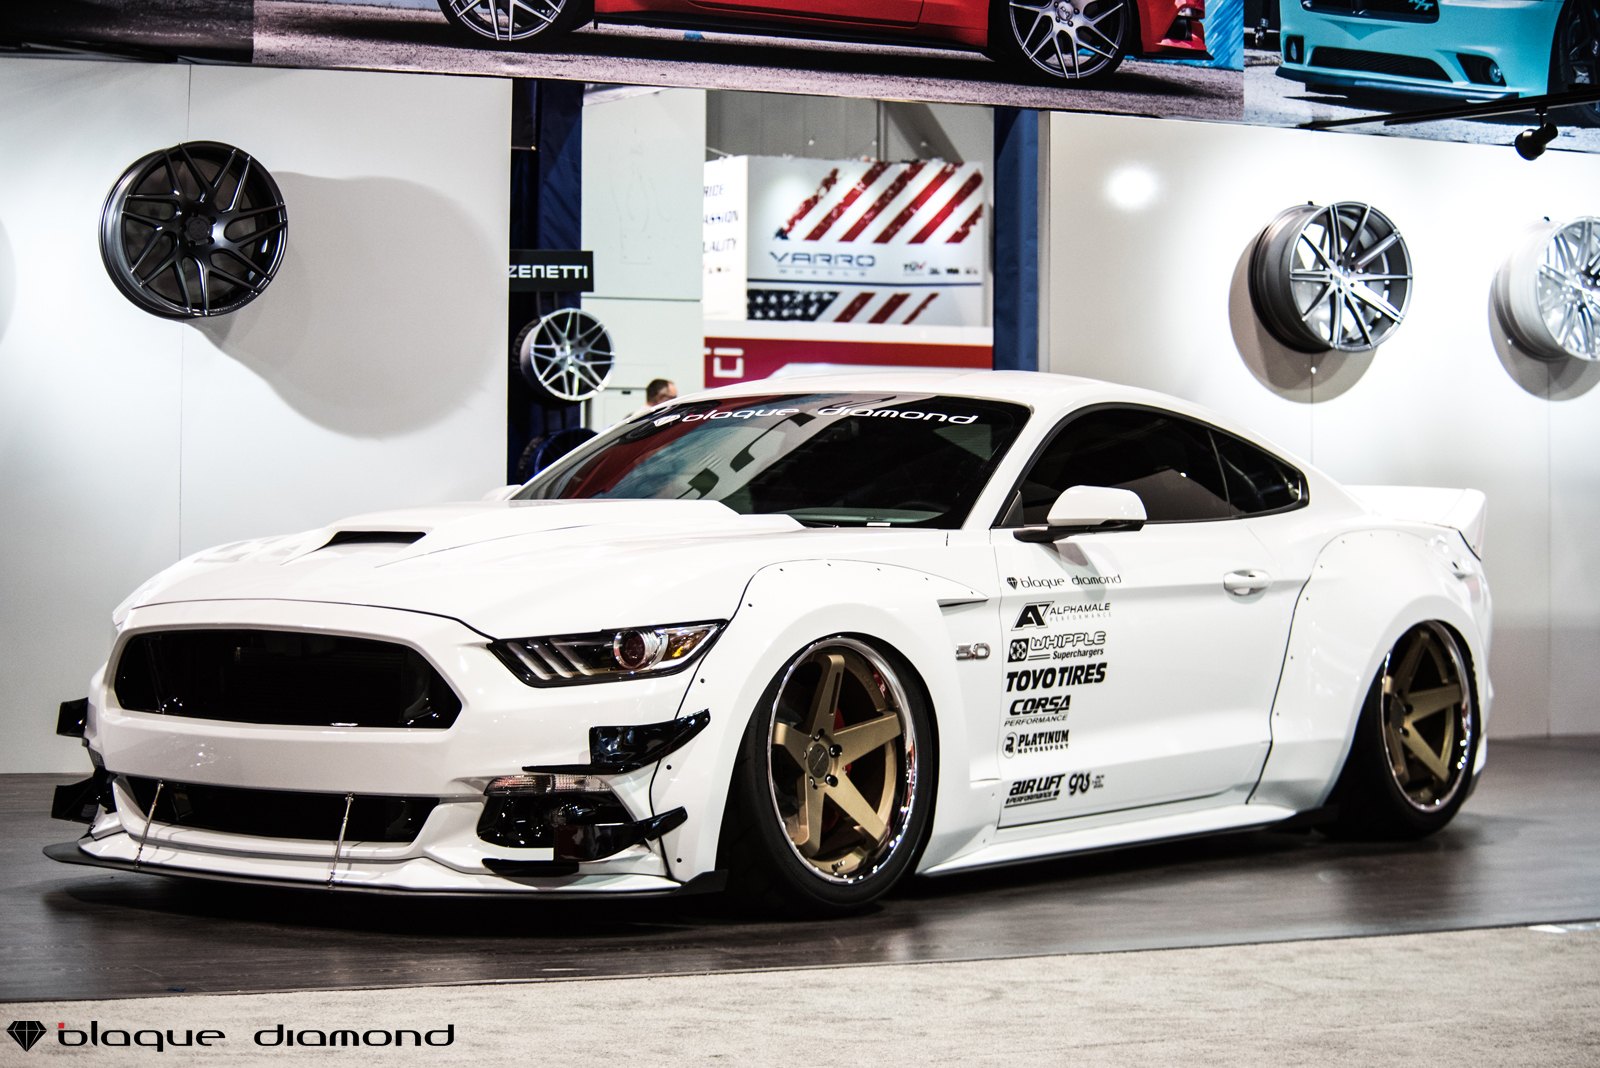 Ford Mustang With Huge Widebody Fenders - Photo by Black Diamond